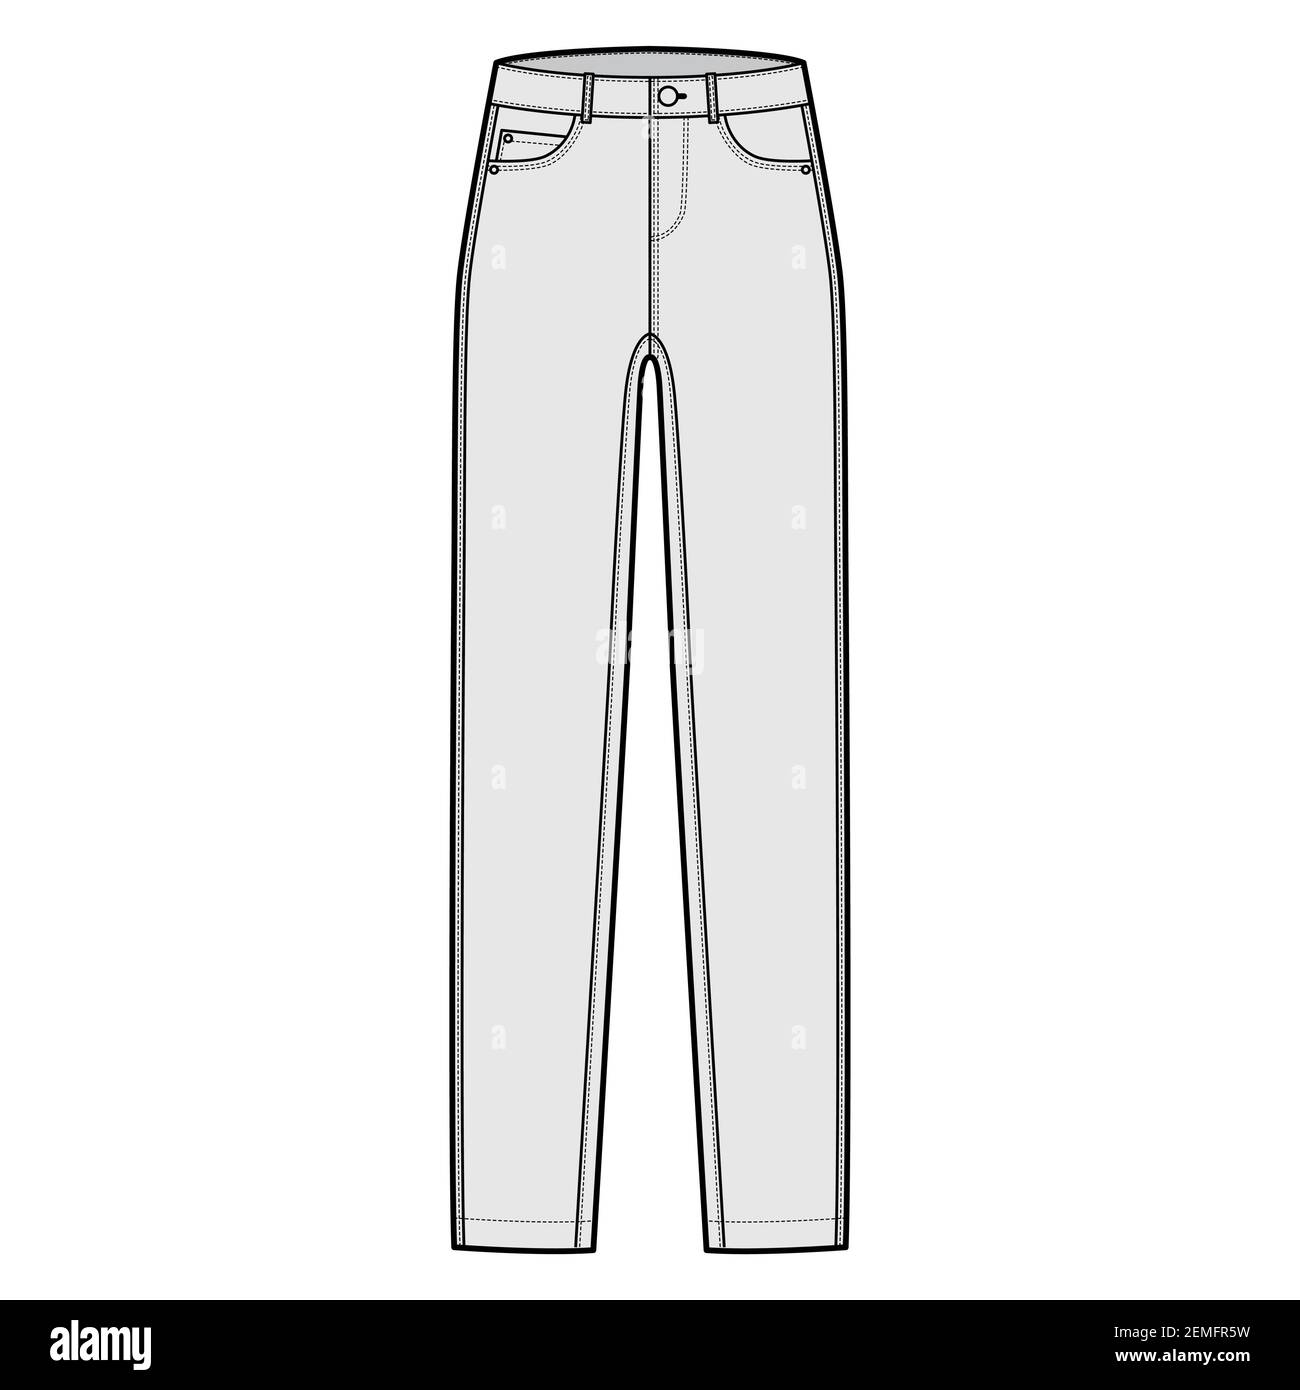 Skinny Jeans Denim pants technical fashion illustration with full ...